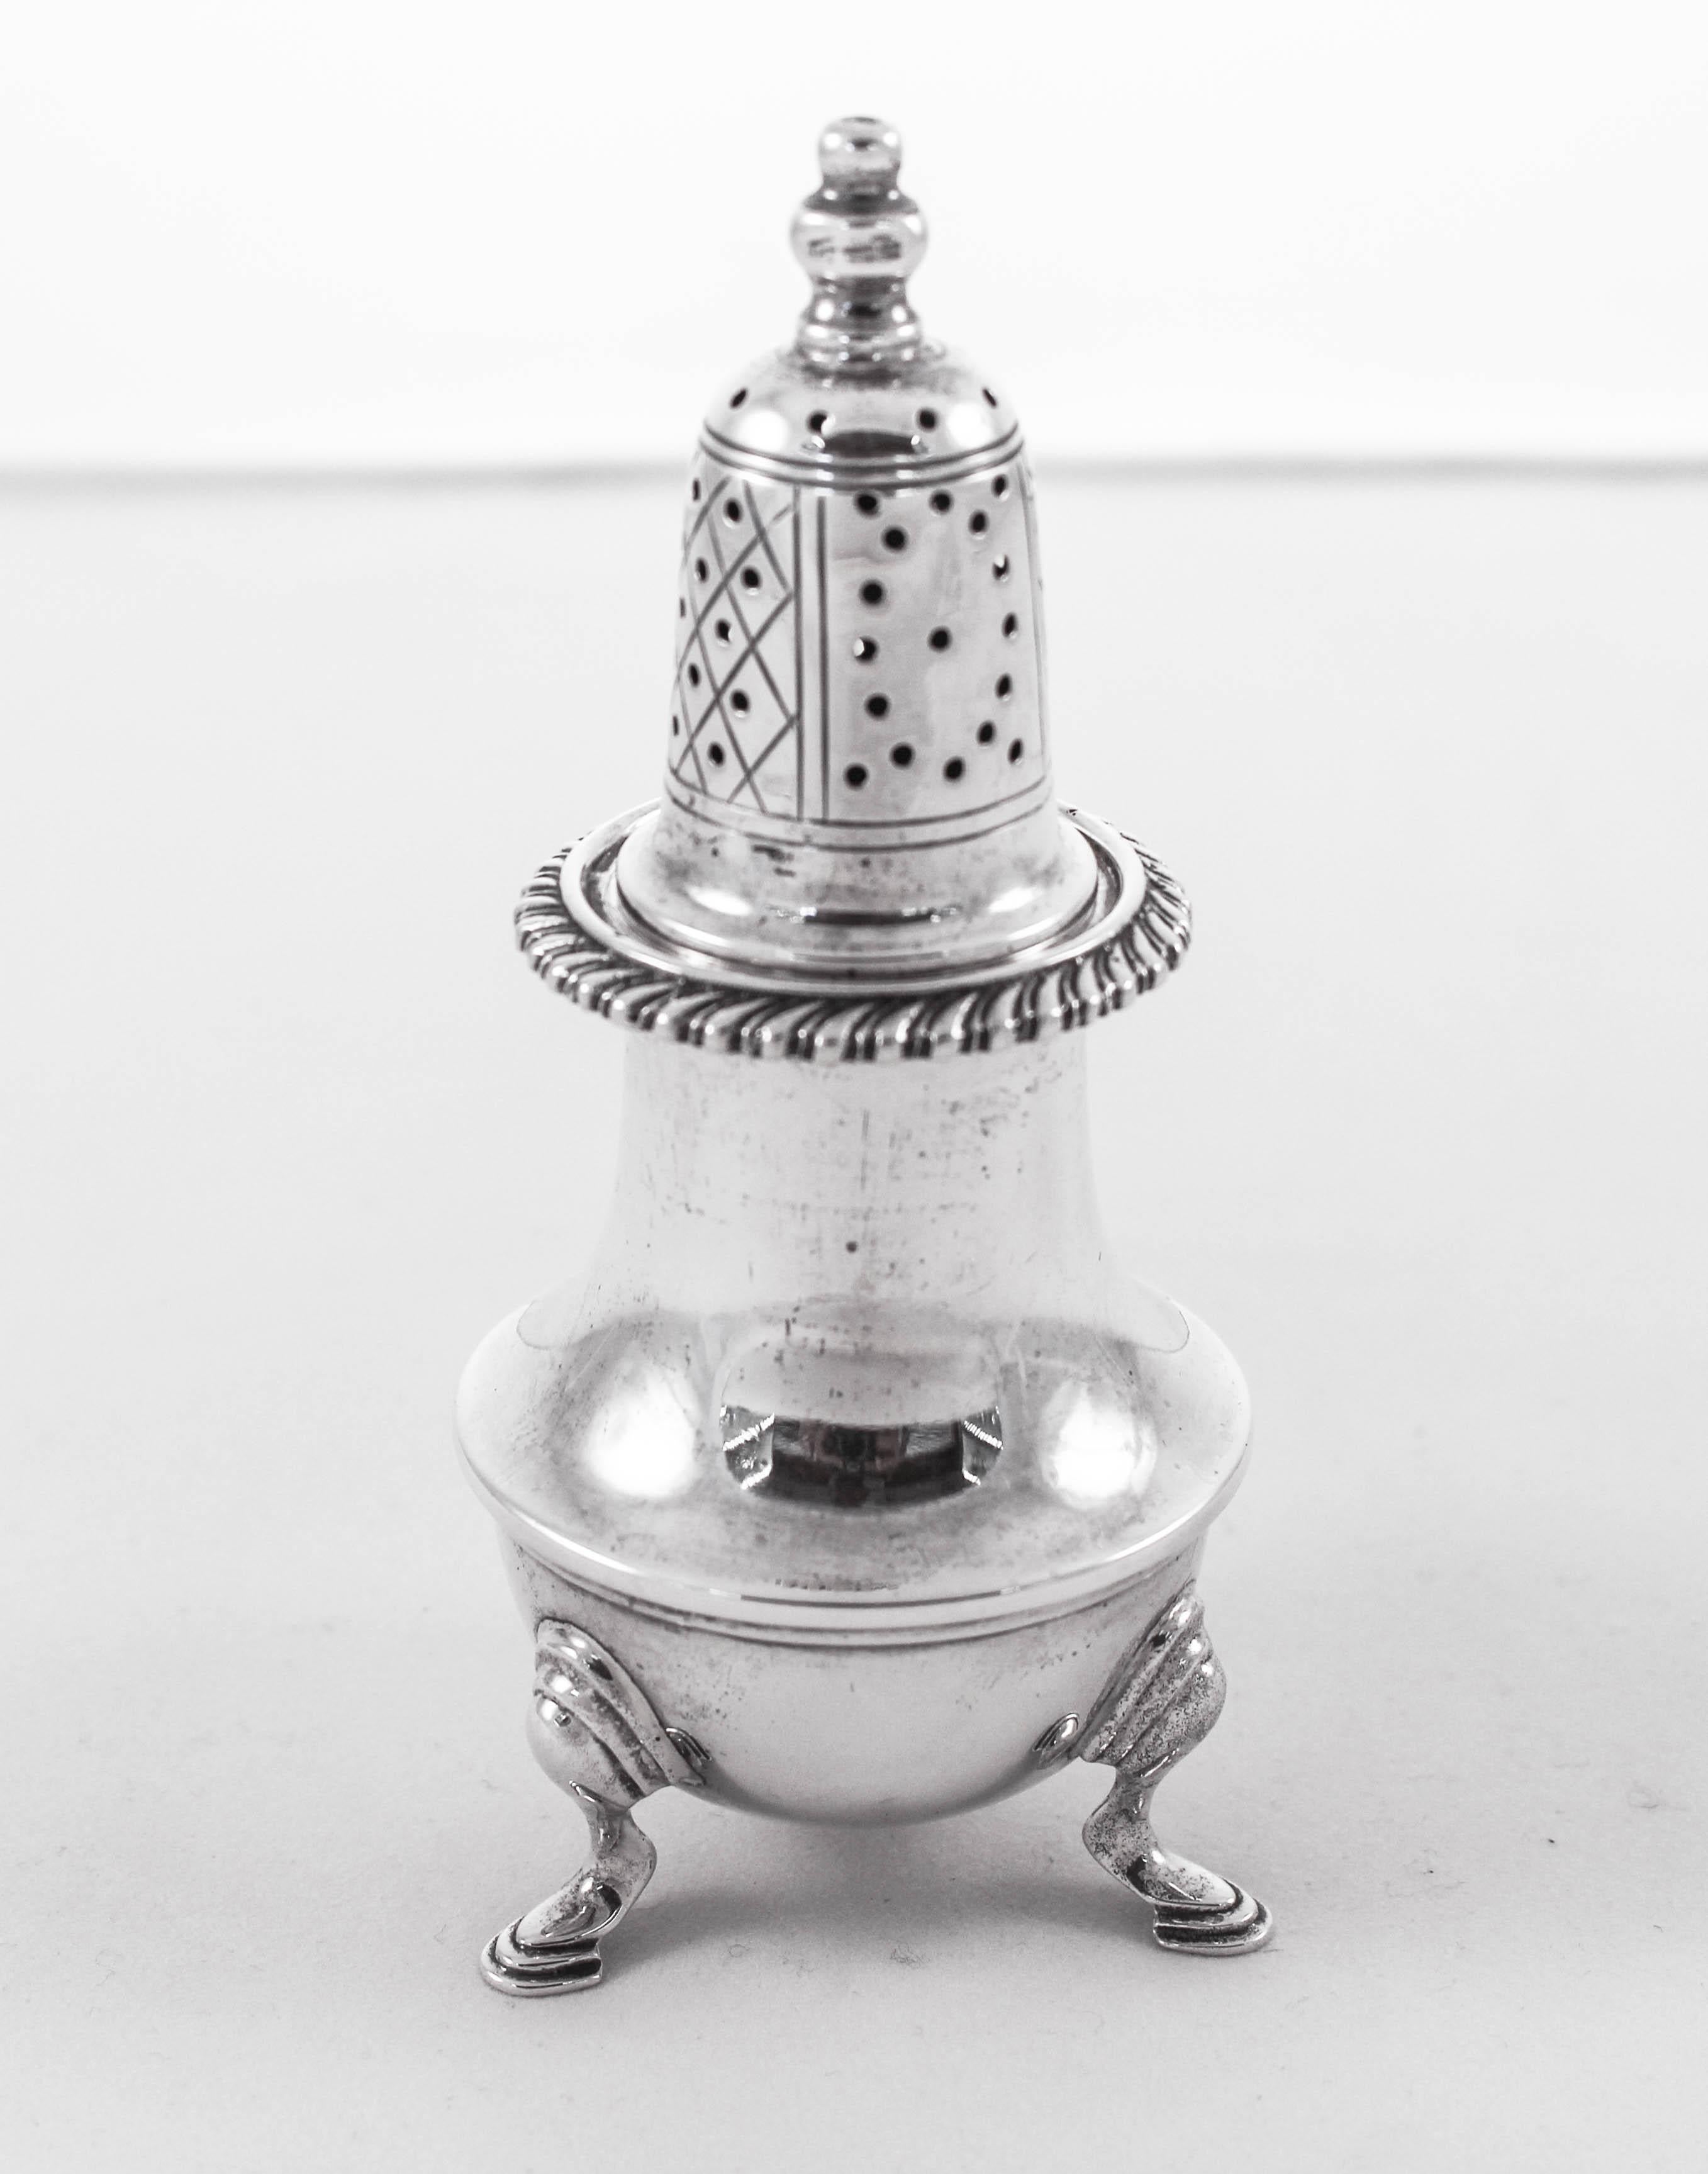 We proudly offer this sterling silver pair of salt and pepper shakers. Each stands on three legs raising it off the table. They have a wide bottom so that they can hold a large amount of salt/pepper. Around the neck a rope pattern wraps around. The